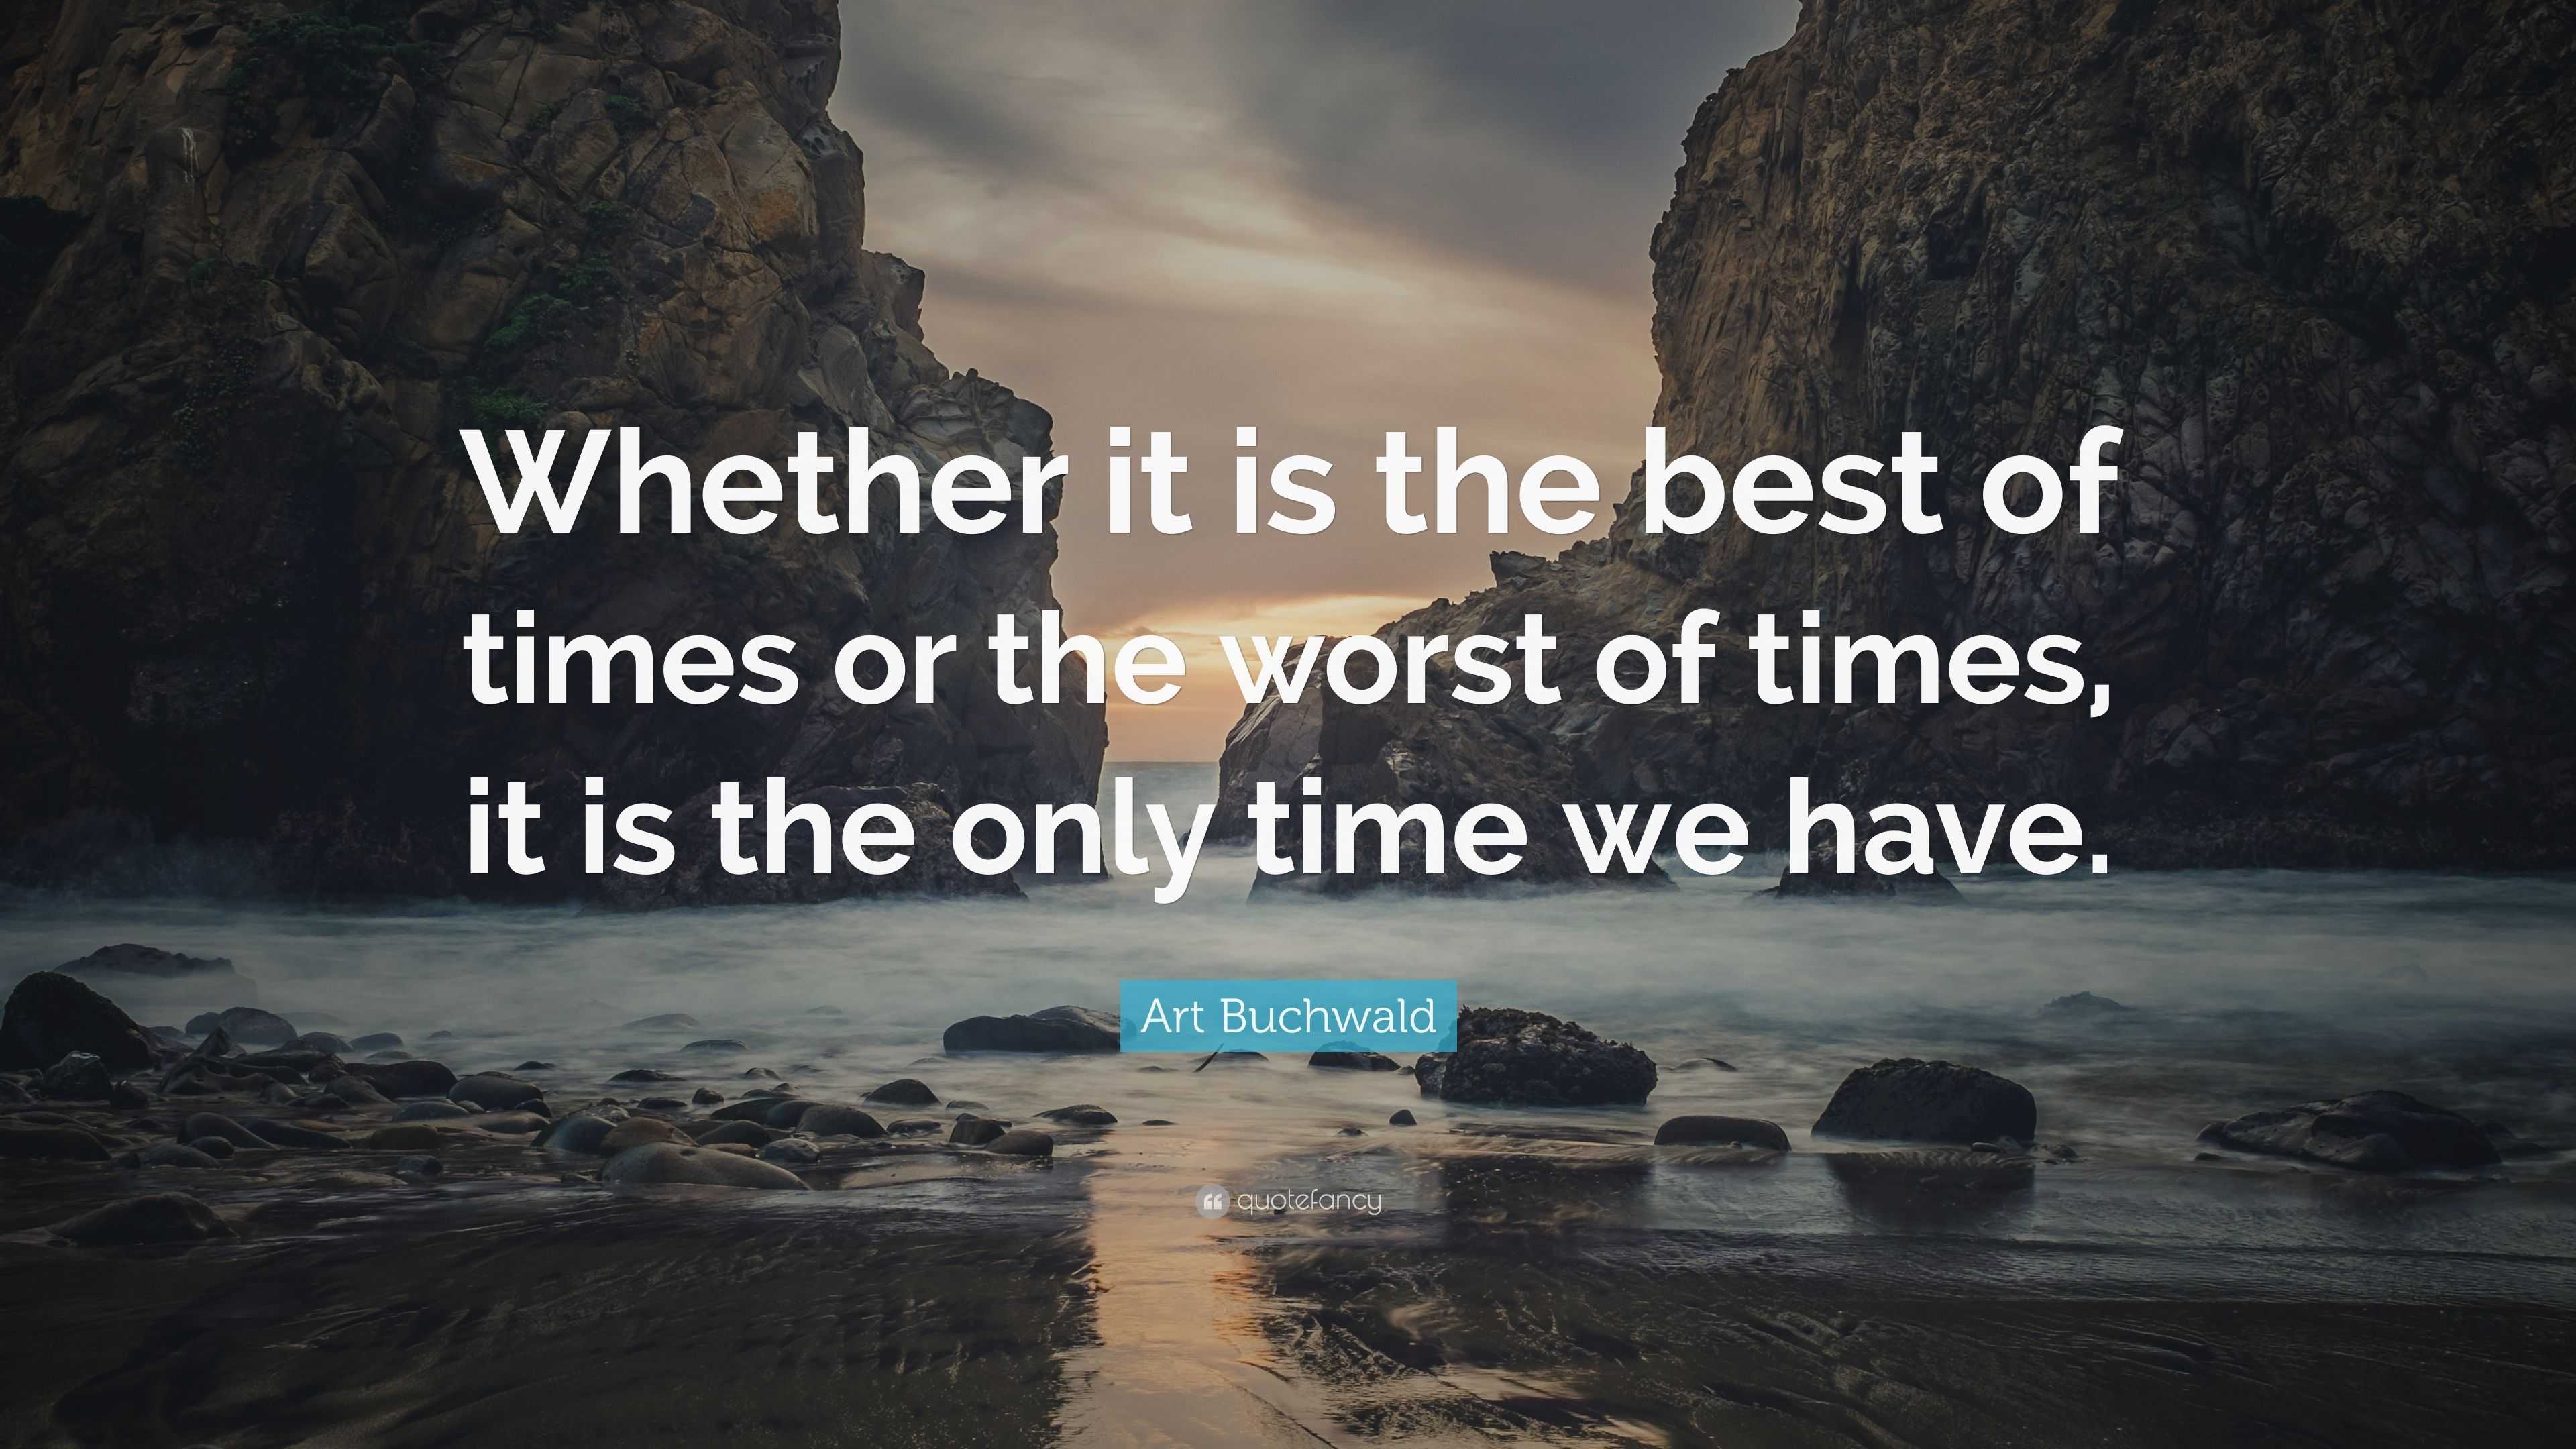 Art Buchwald - Whether it's the best of times or the worst